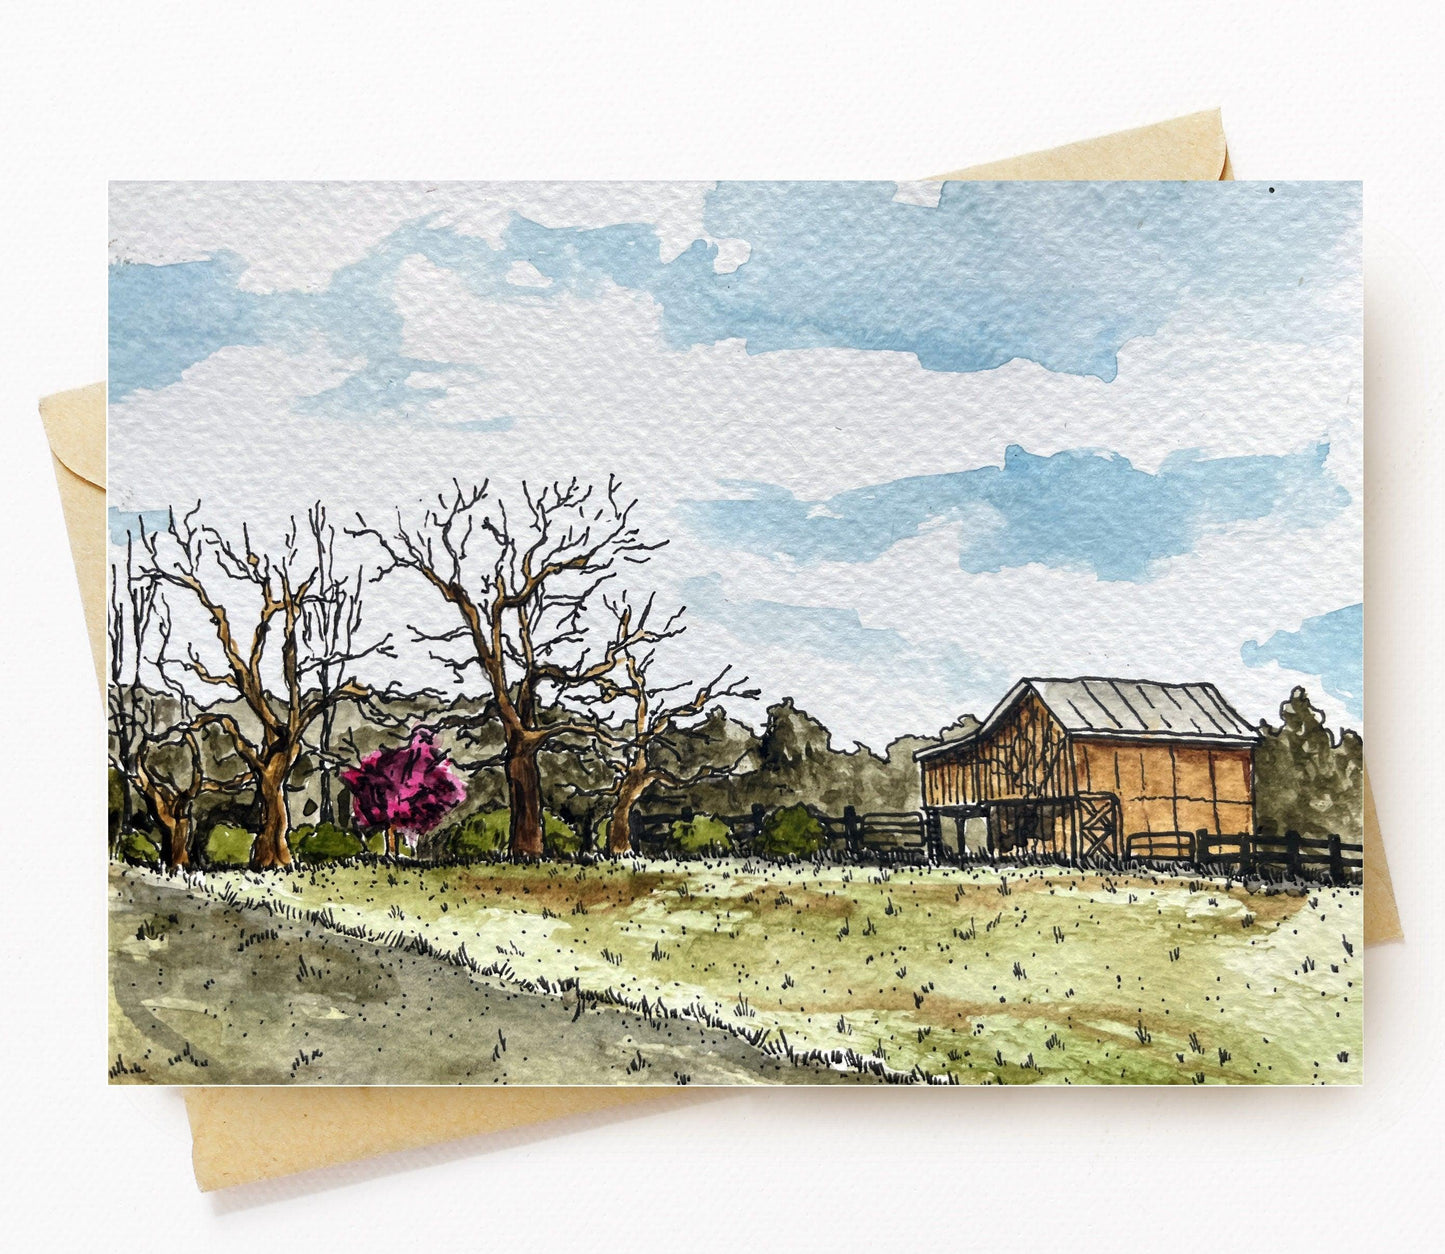 BellavanceInk: Greeting Card With Watercolor Of Farm Field In Afton Virginia With 5 x 7 Inches - BellavanceInk